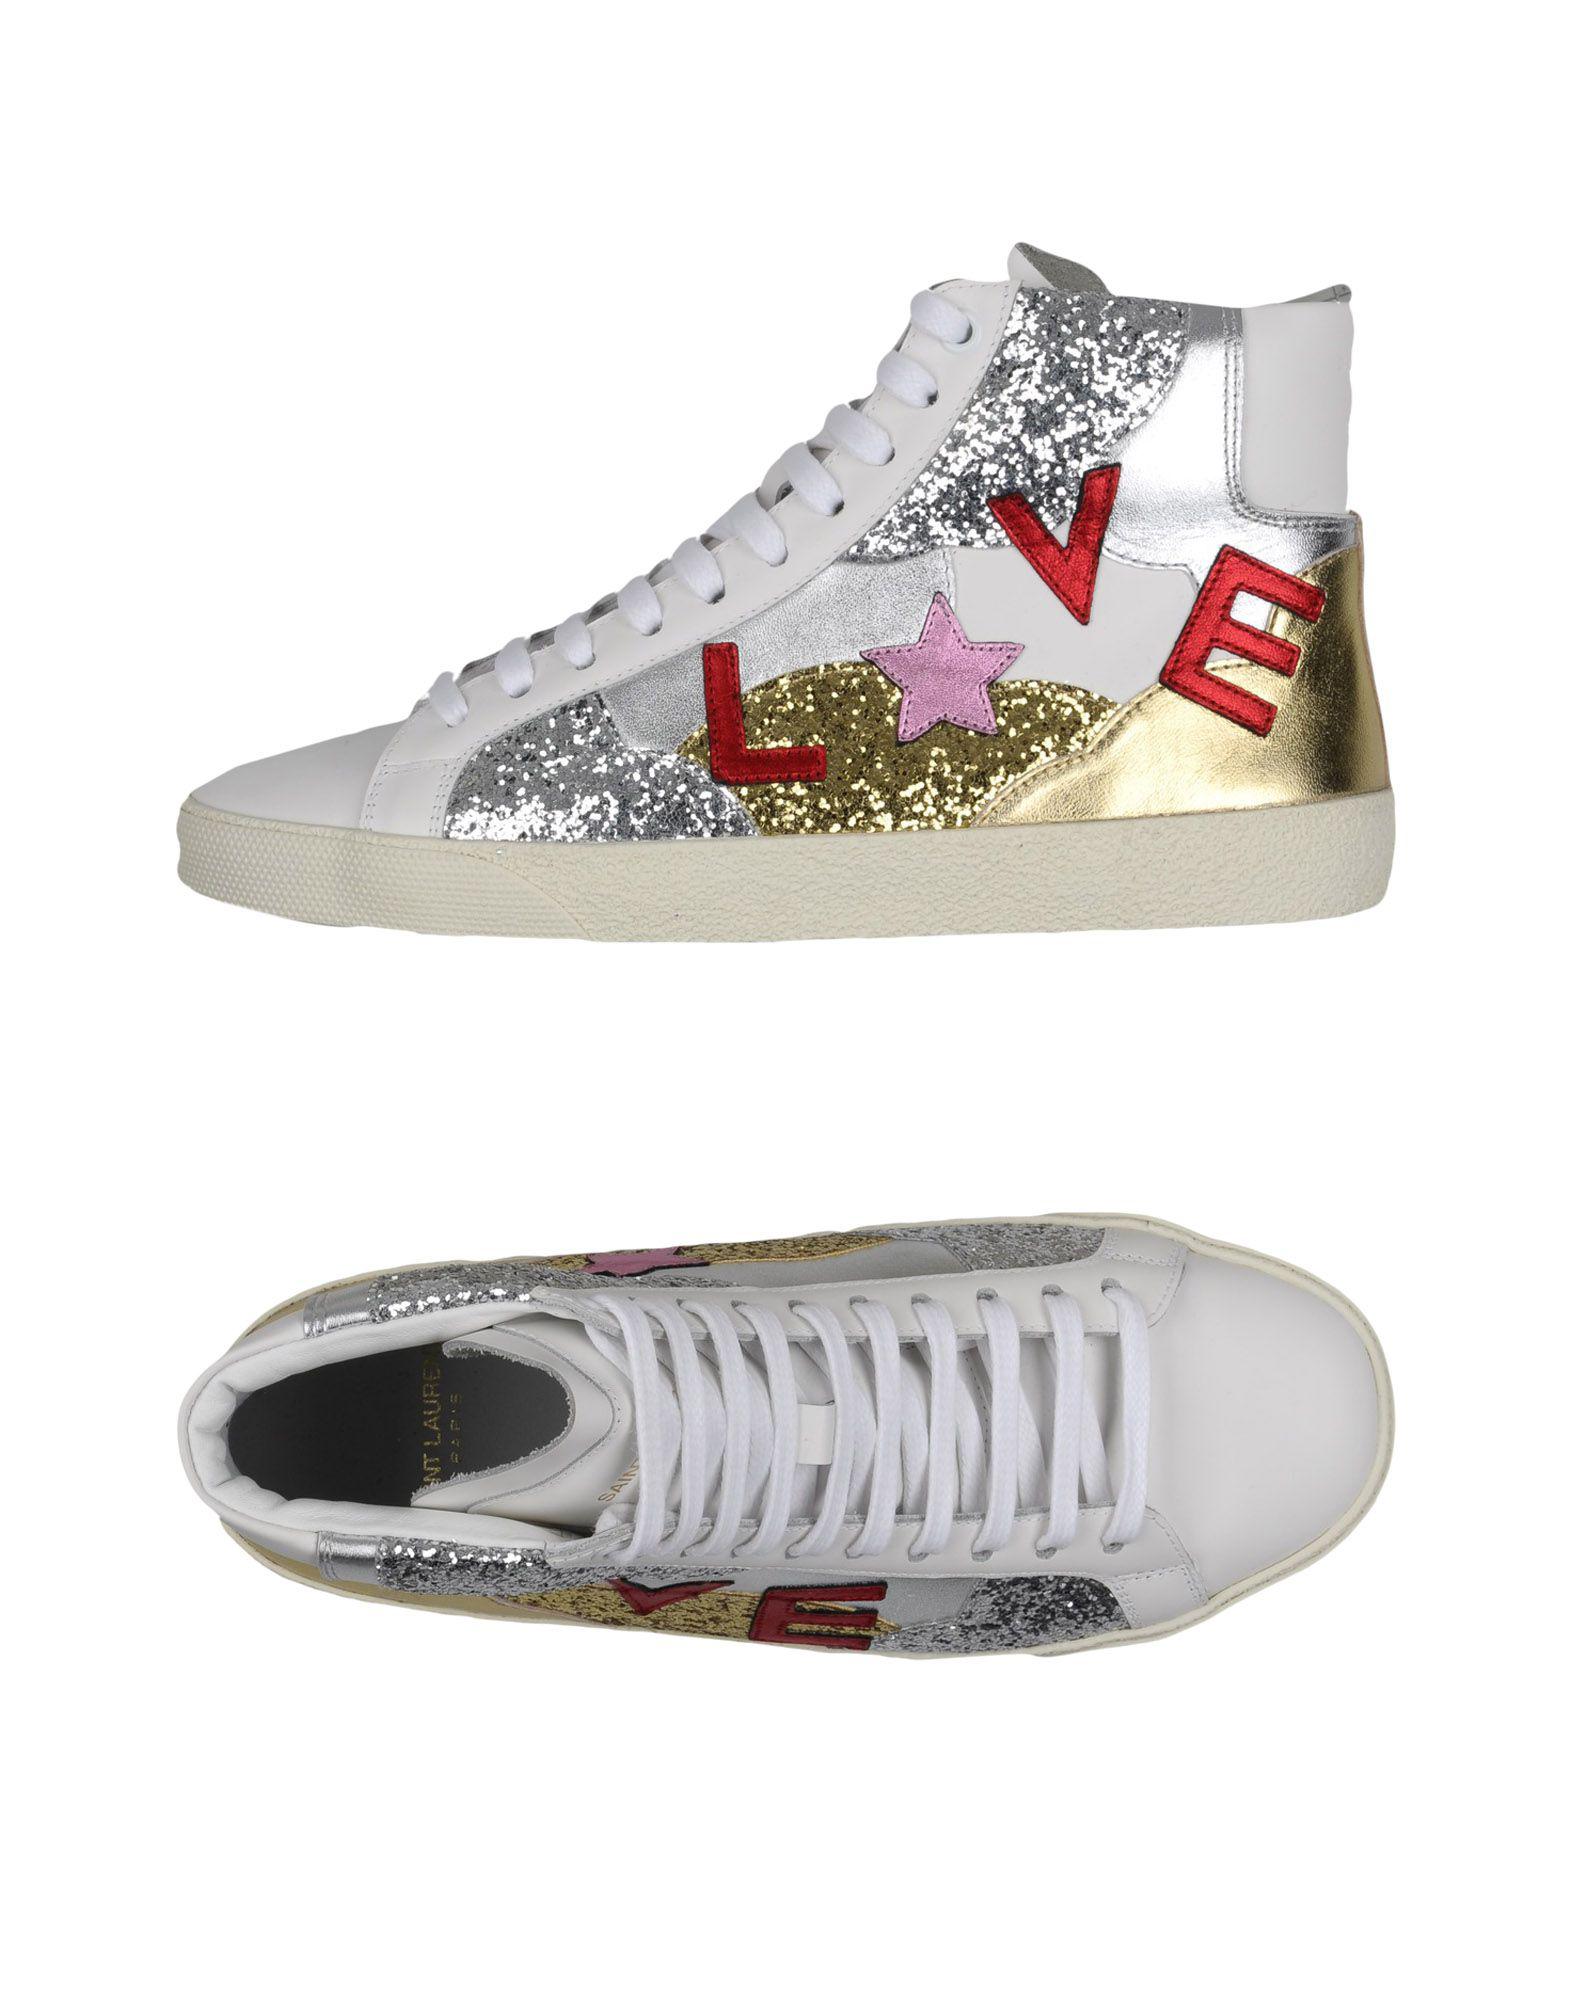 Saint Laurent Leather High-tops & Sneakers in White - Lyst